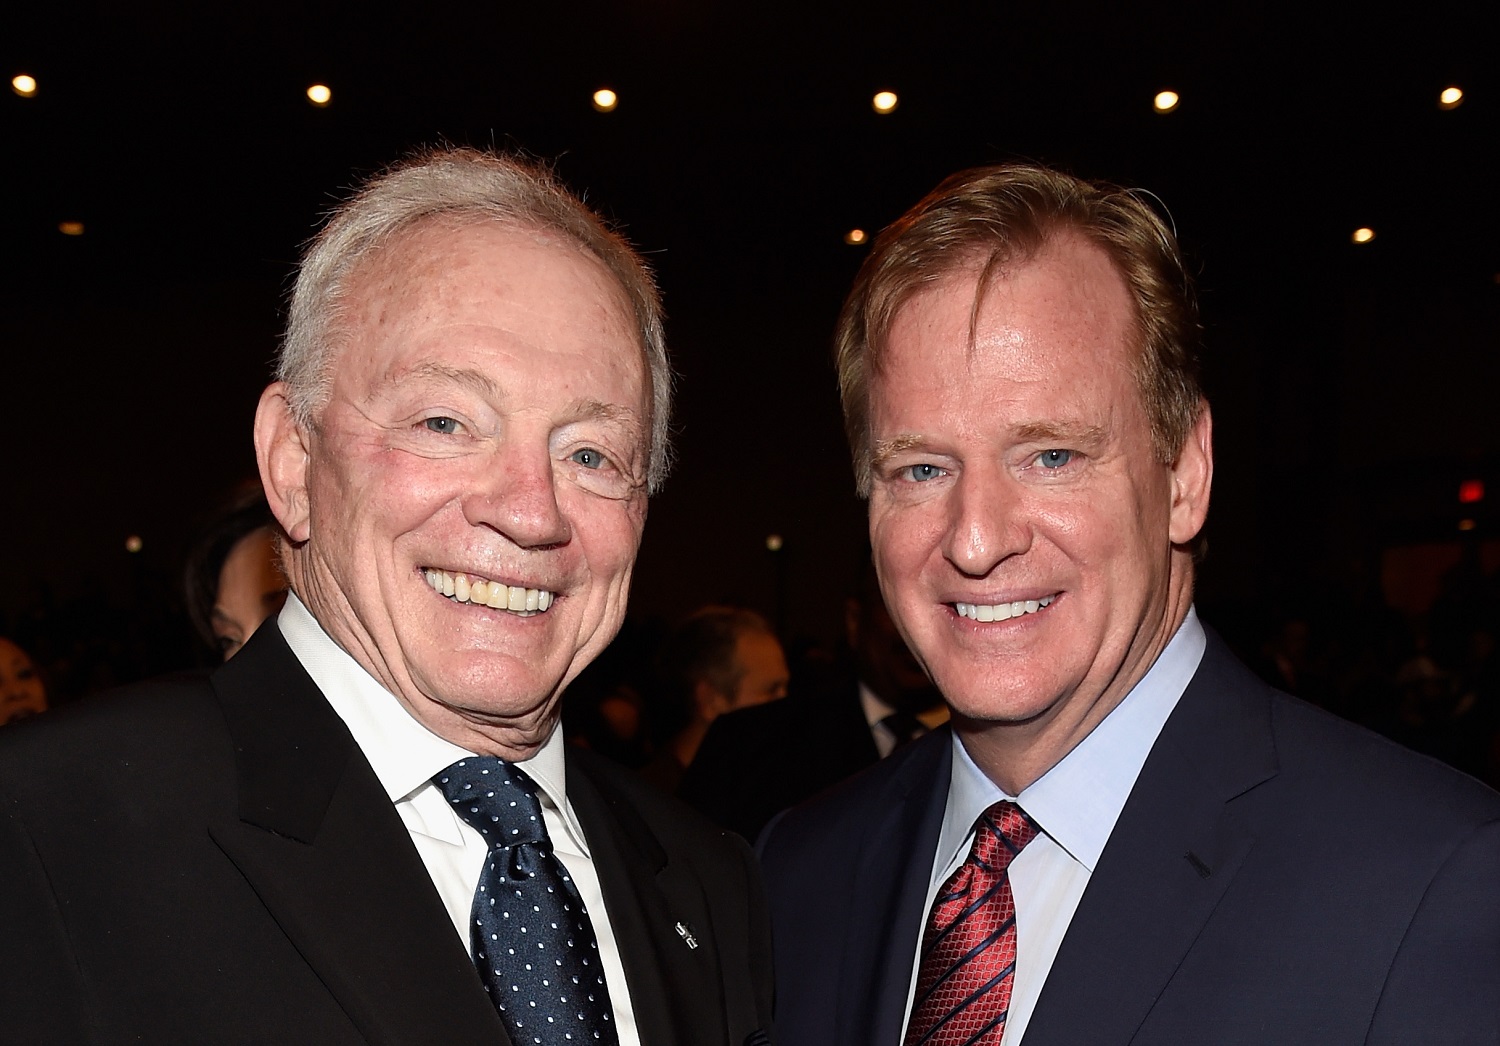 Dallas Cowboys owner Jerry Jones and NFL commissioner Roger Goodell attend the 4th annual NFL Honors at Phoenix Convention Center on Jan. 31, 2015, in Phoenix, Arizona.